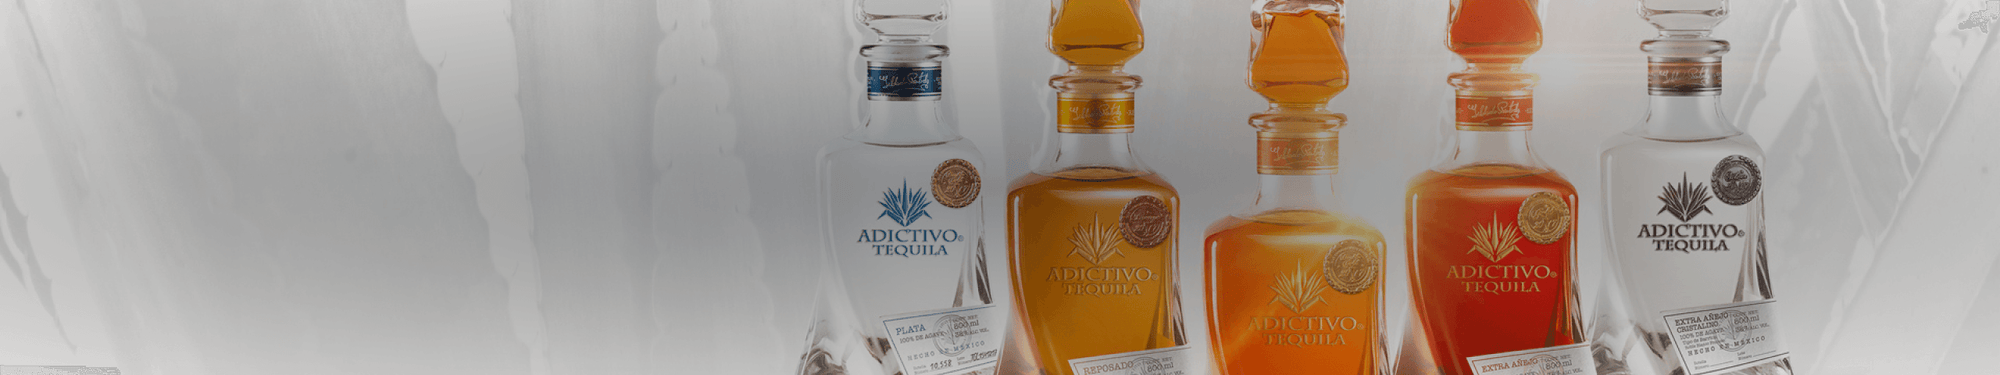 Adictivo Tequila Collection